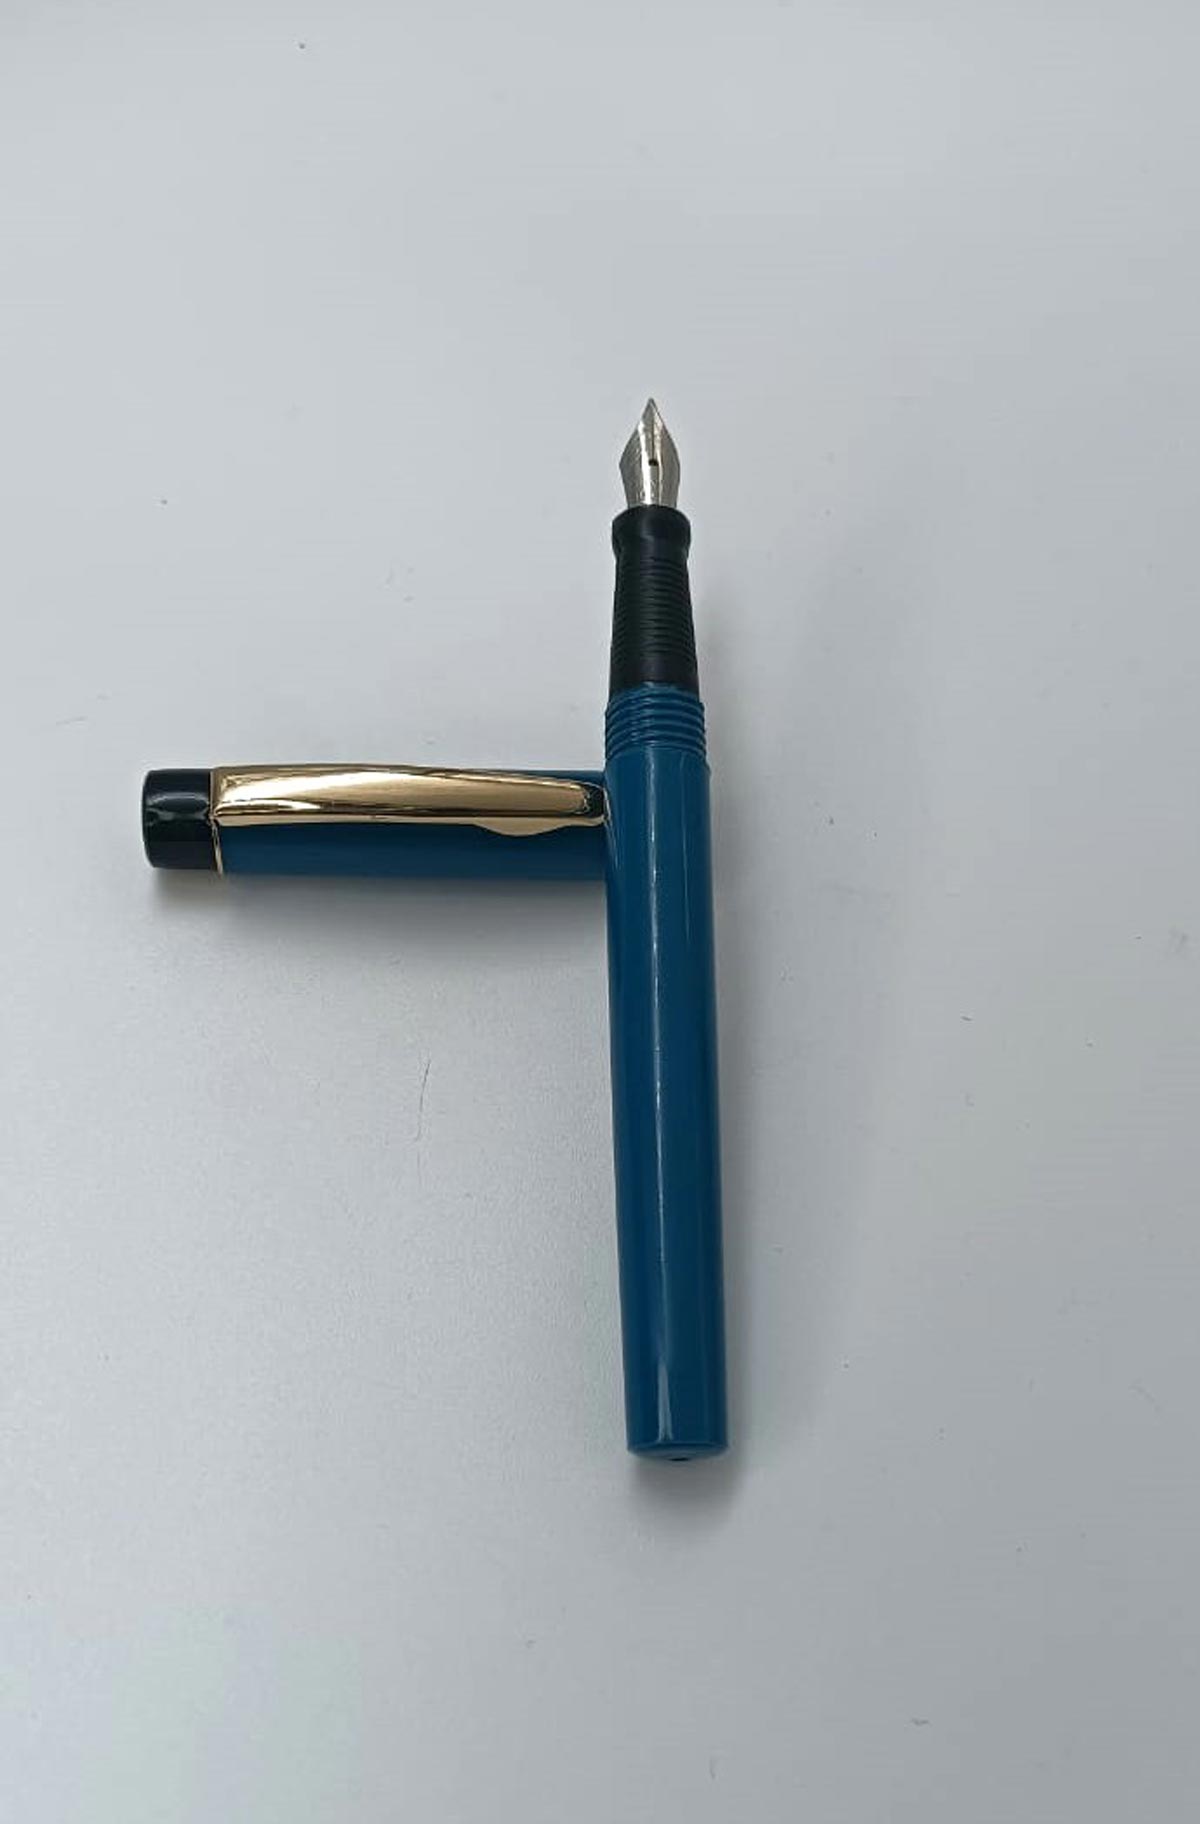 Oliver 05 Turquoise Blue Color Body With Gold Trim Fine Nib Eye Dropper Model Fountain Pen  SKU 24917